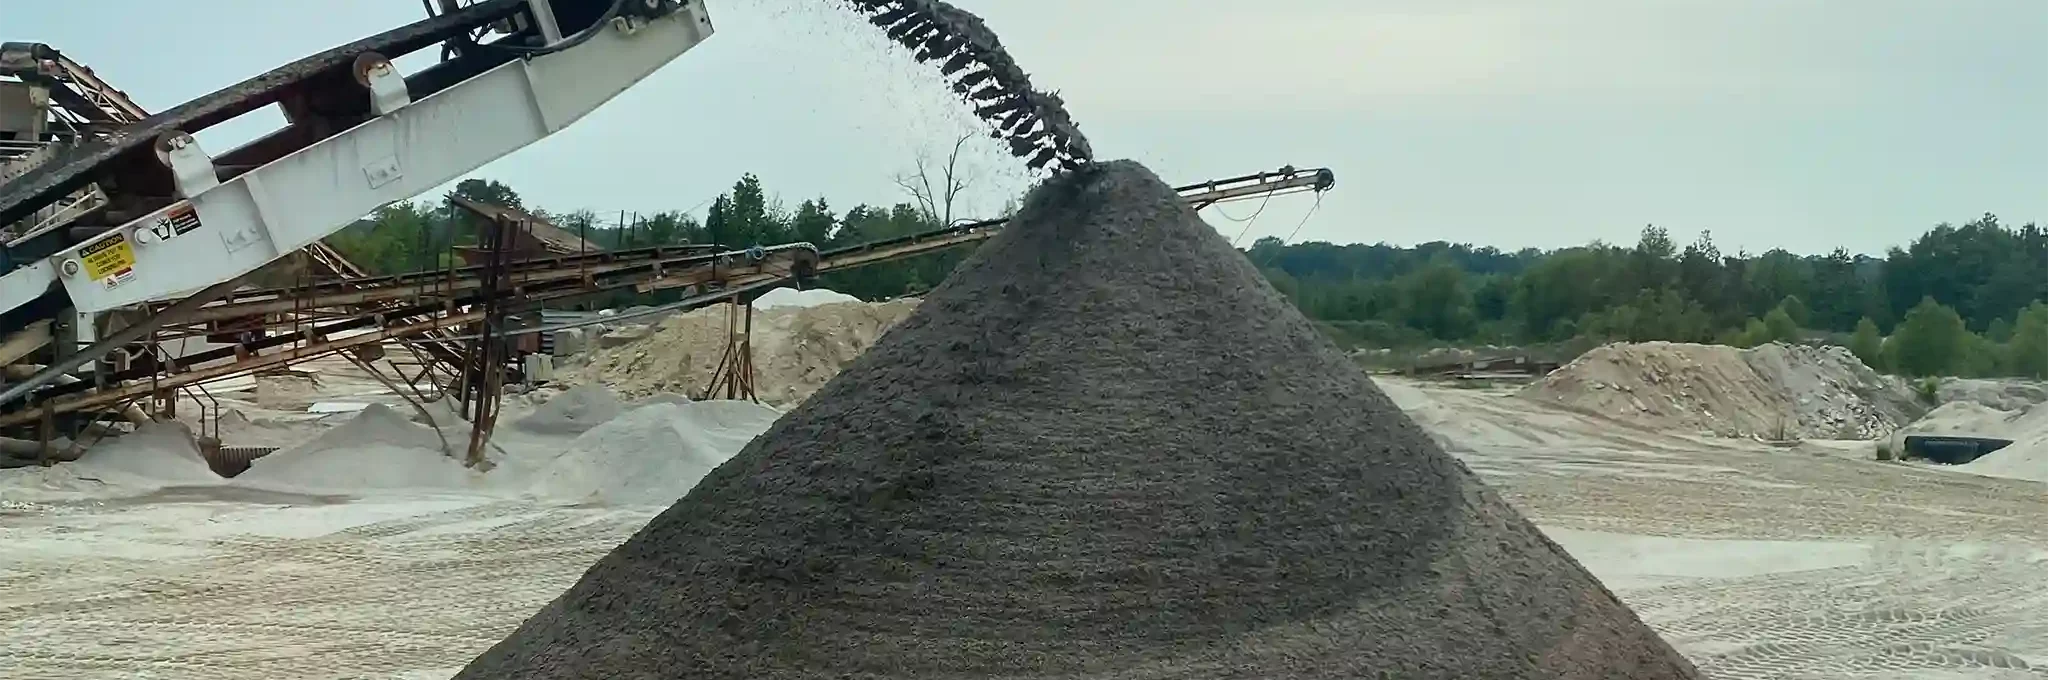 A large pile of 80-20 Greensmix blend being piled outside.